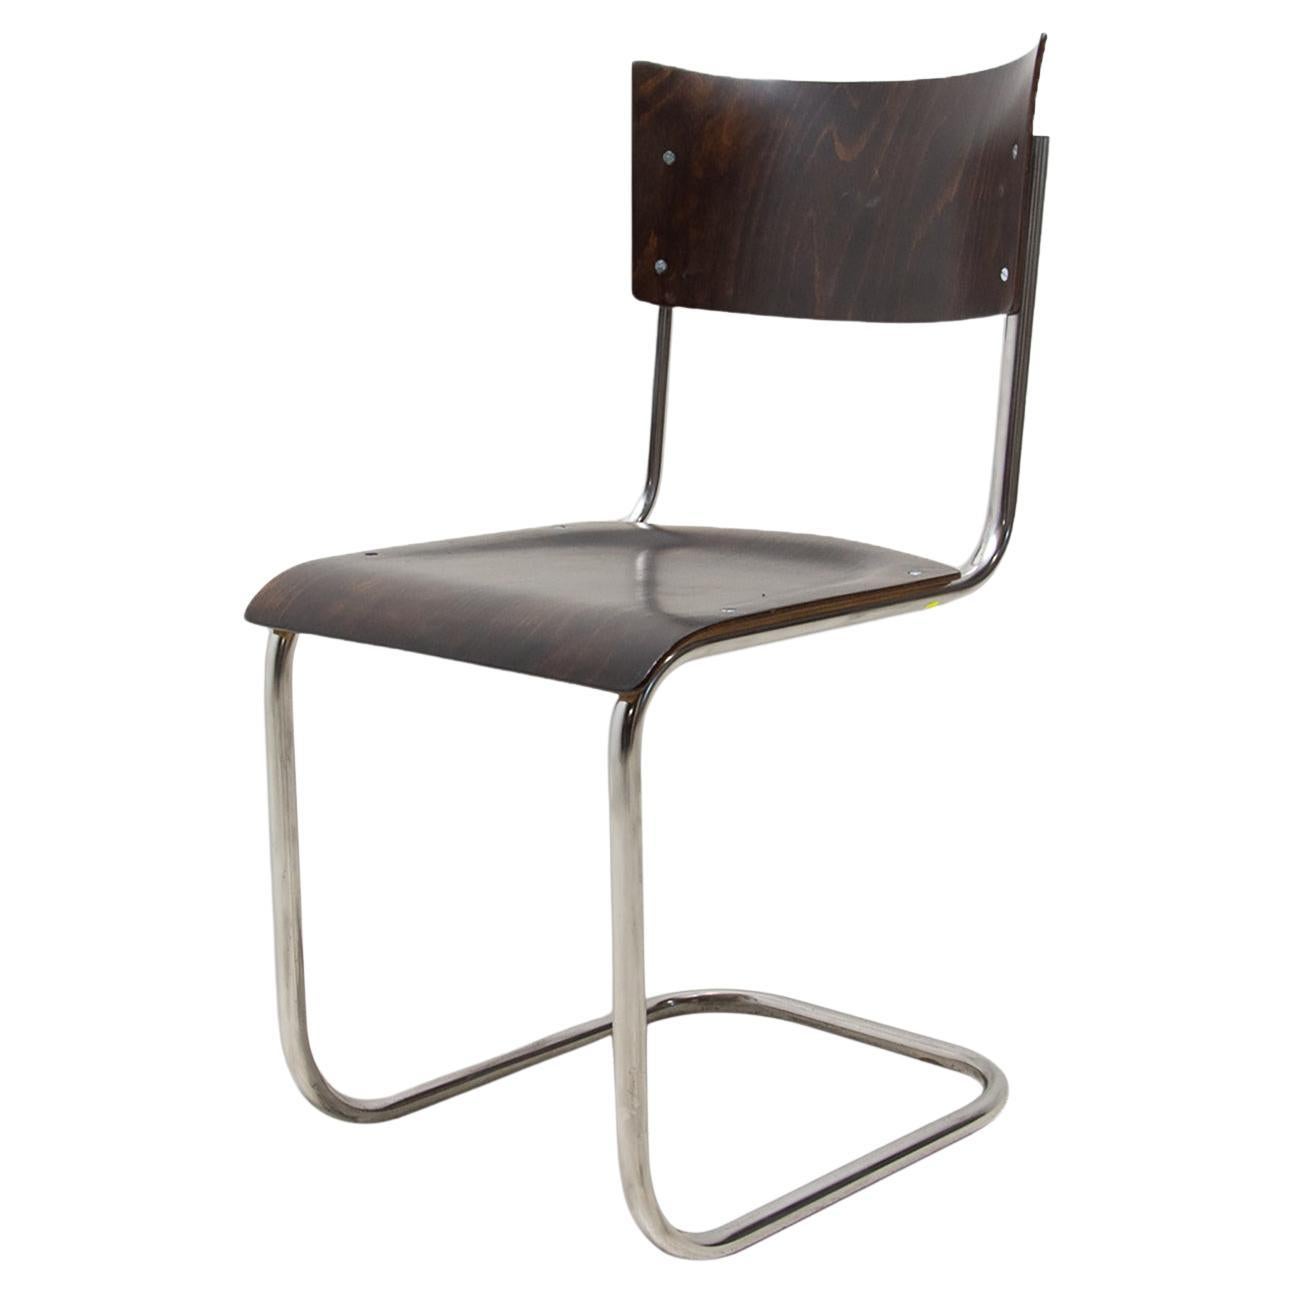 Bauhaus Chair S43 by Mart Stam, 1930s For Sale